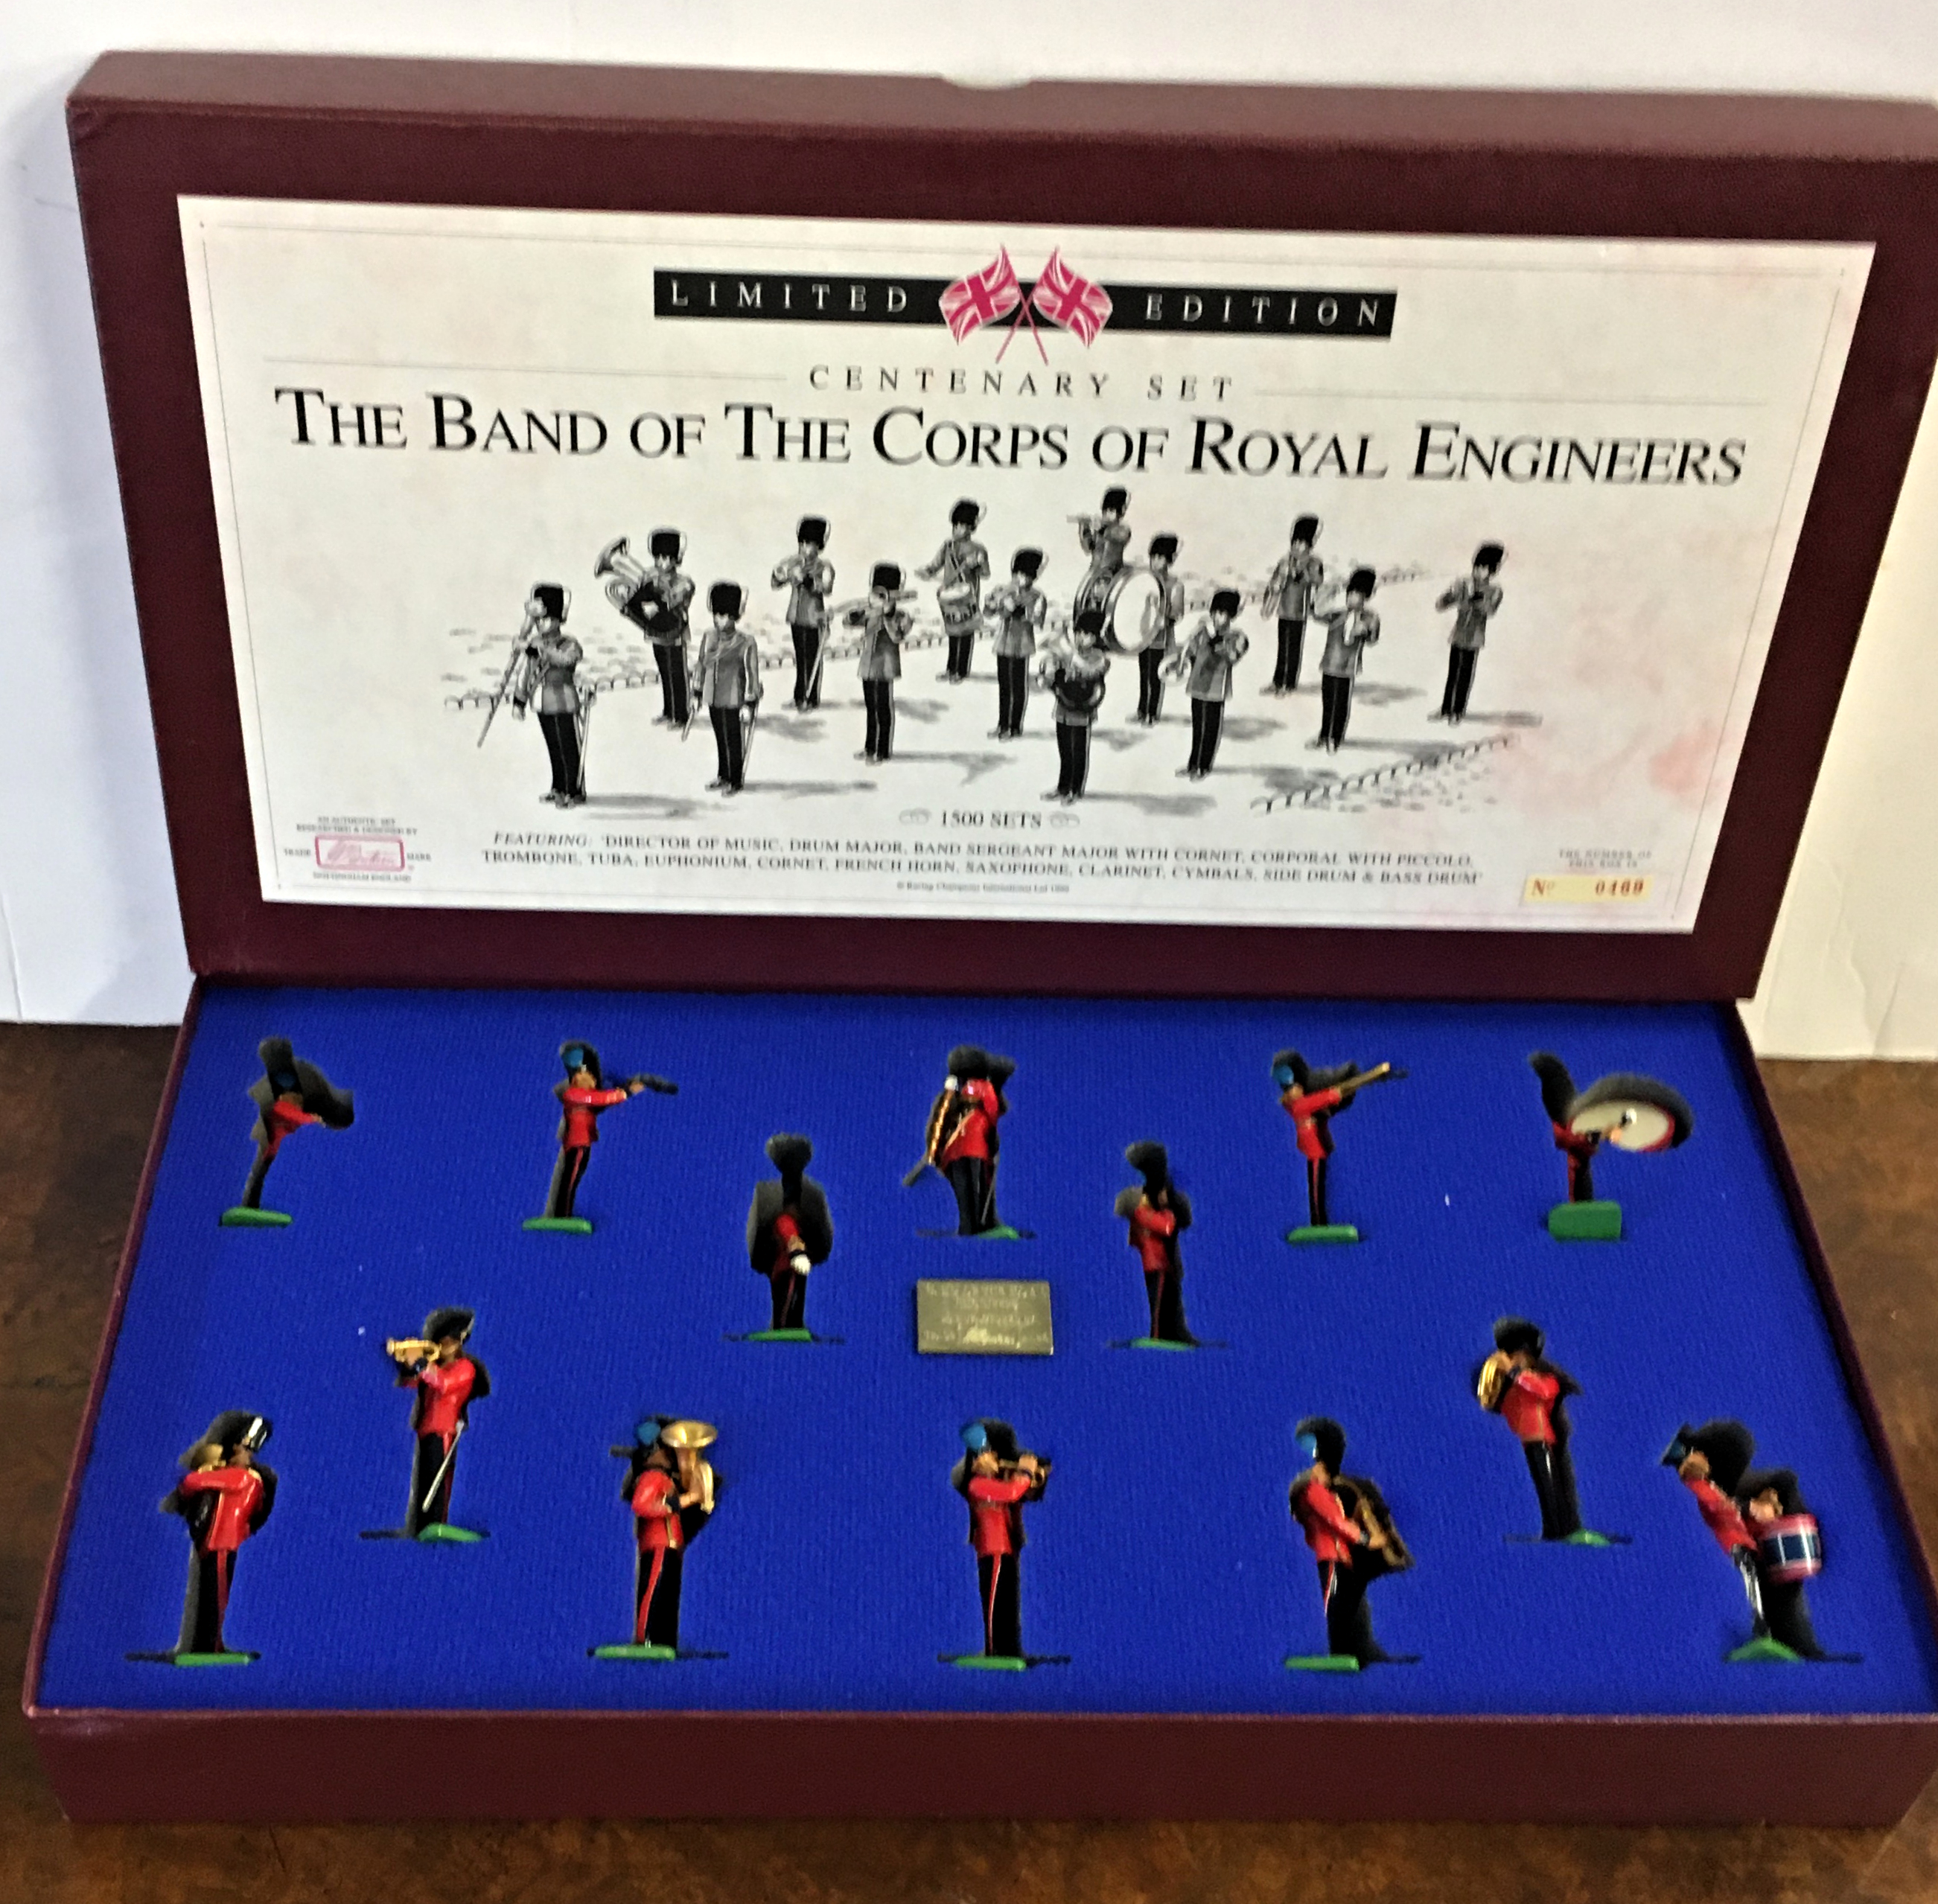 Britains Soldiers - Modern release limited edition boxed Centenary set - The Band of the Corps of